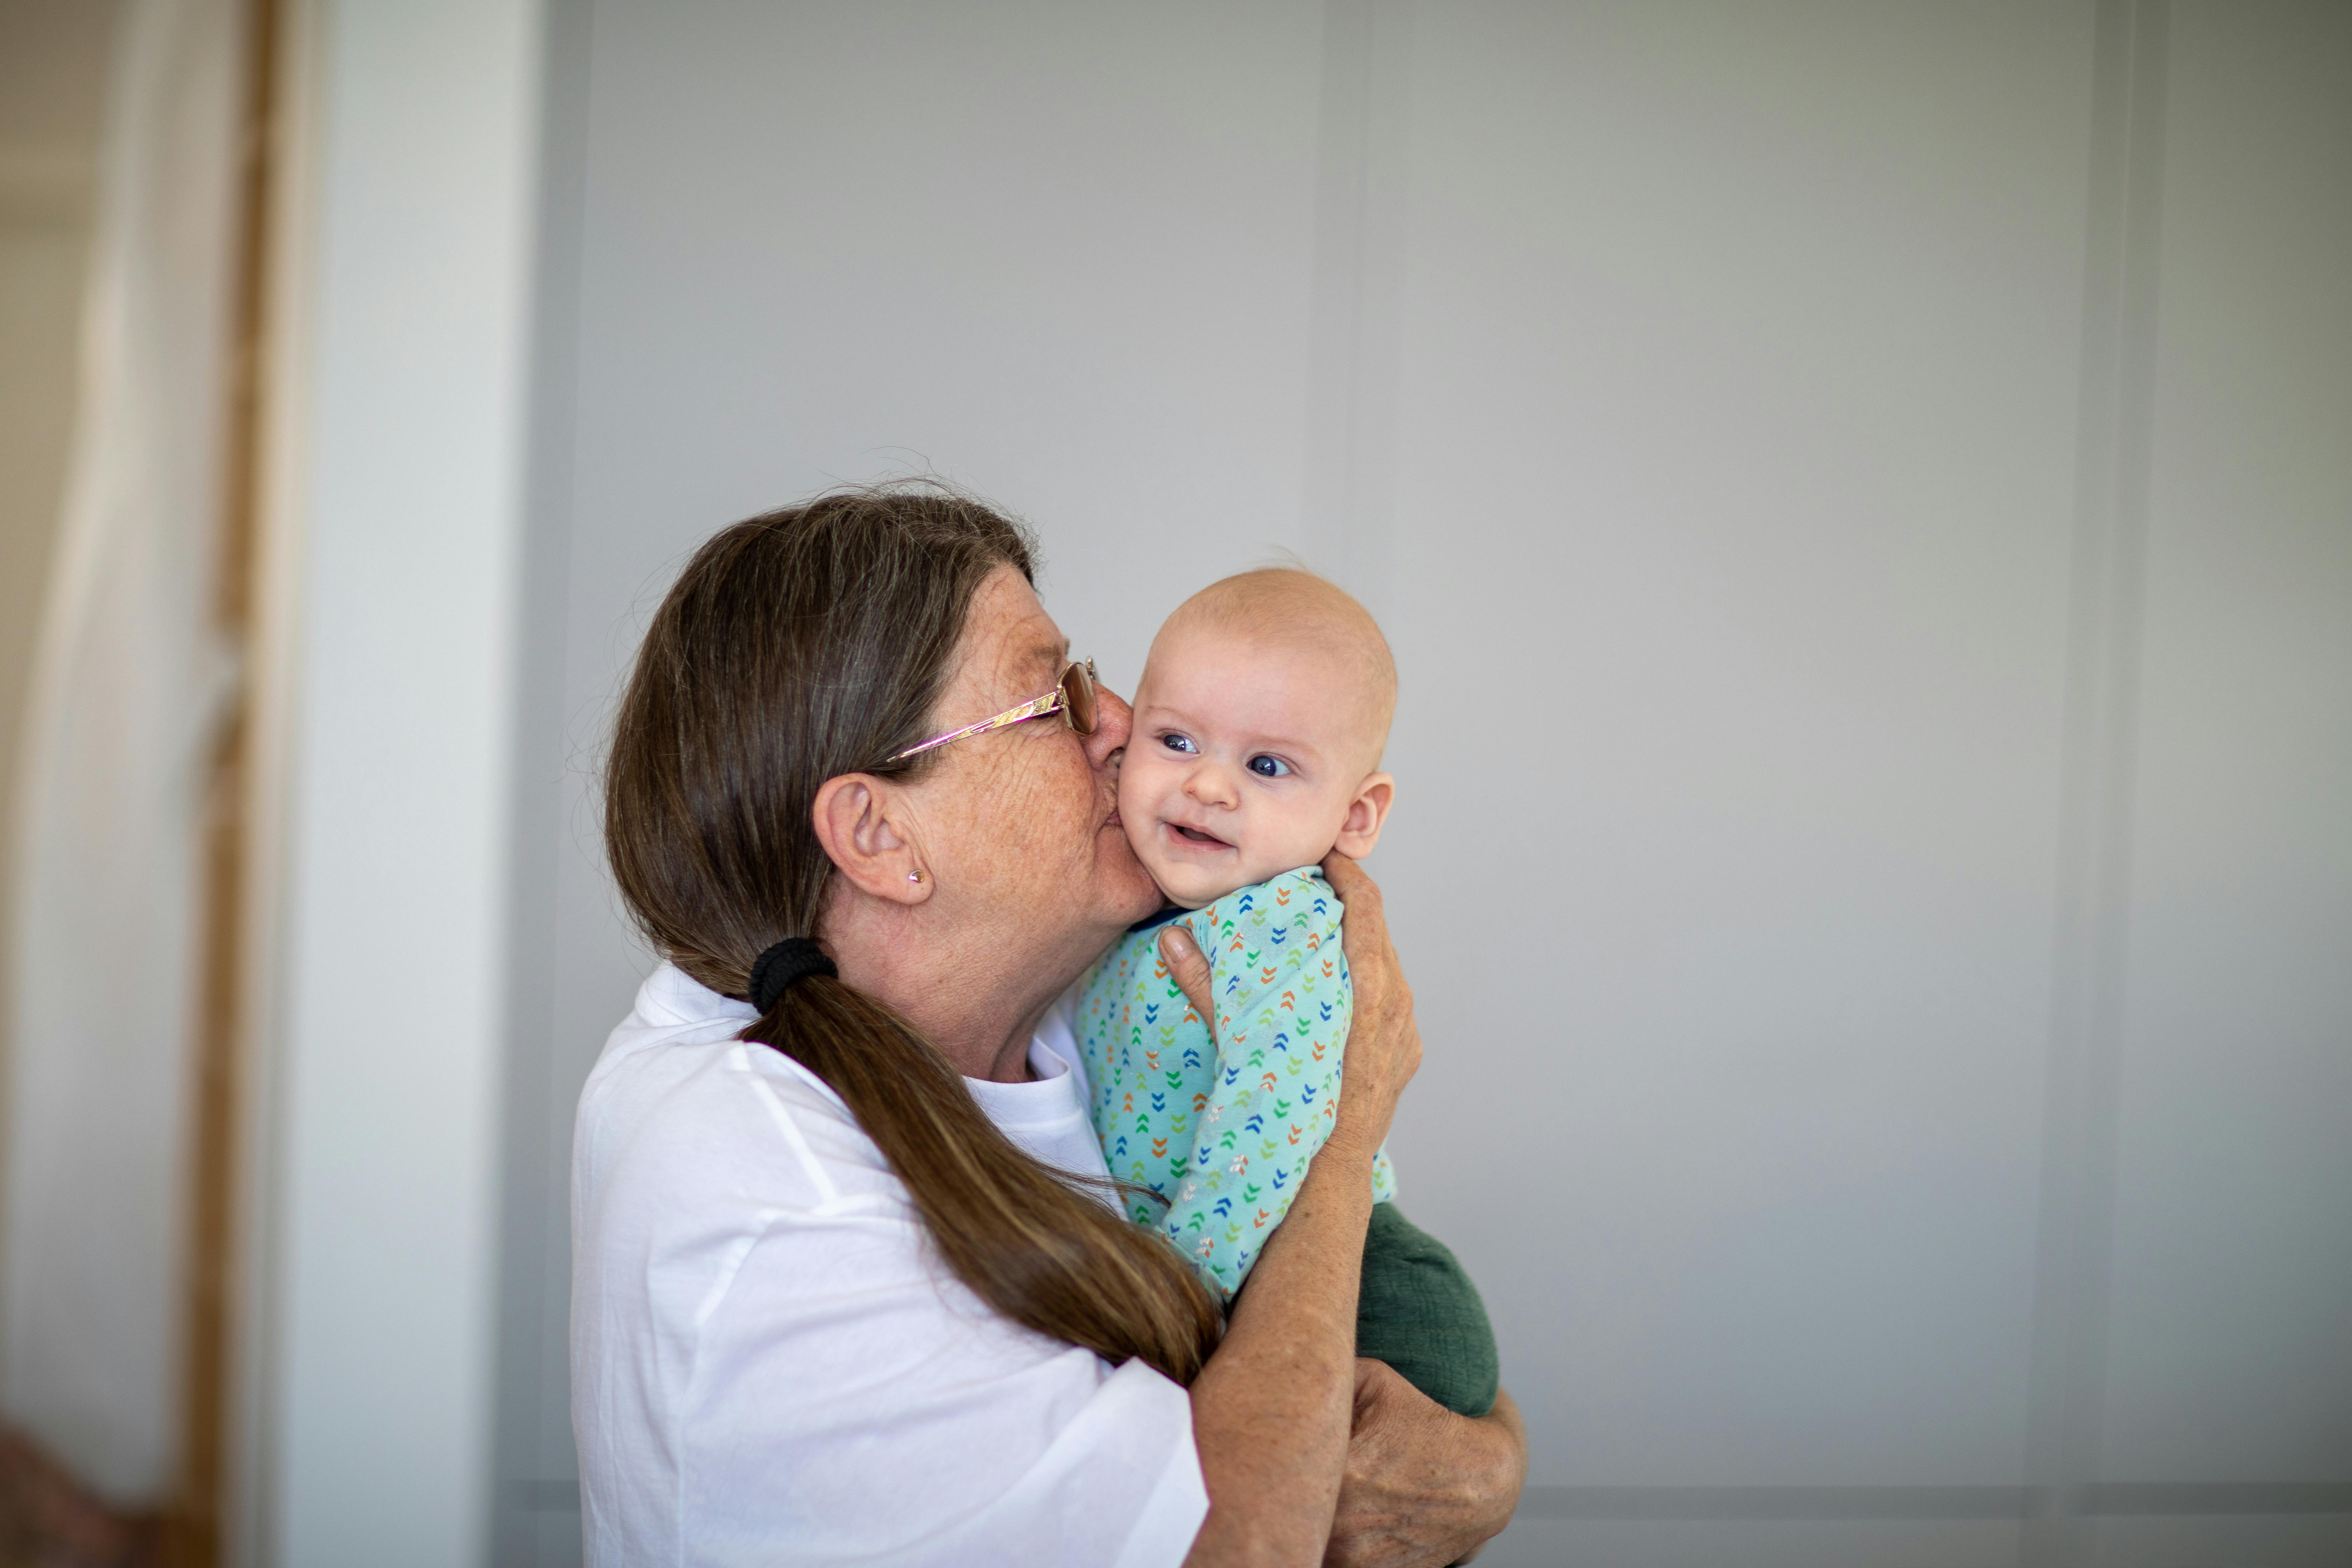 A senior woman kissing a baby on the cheek | Source: Pexels